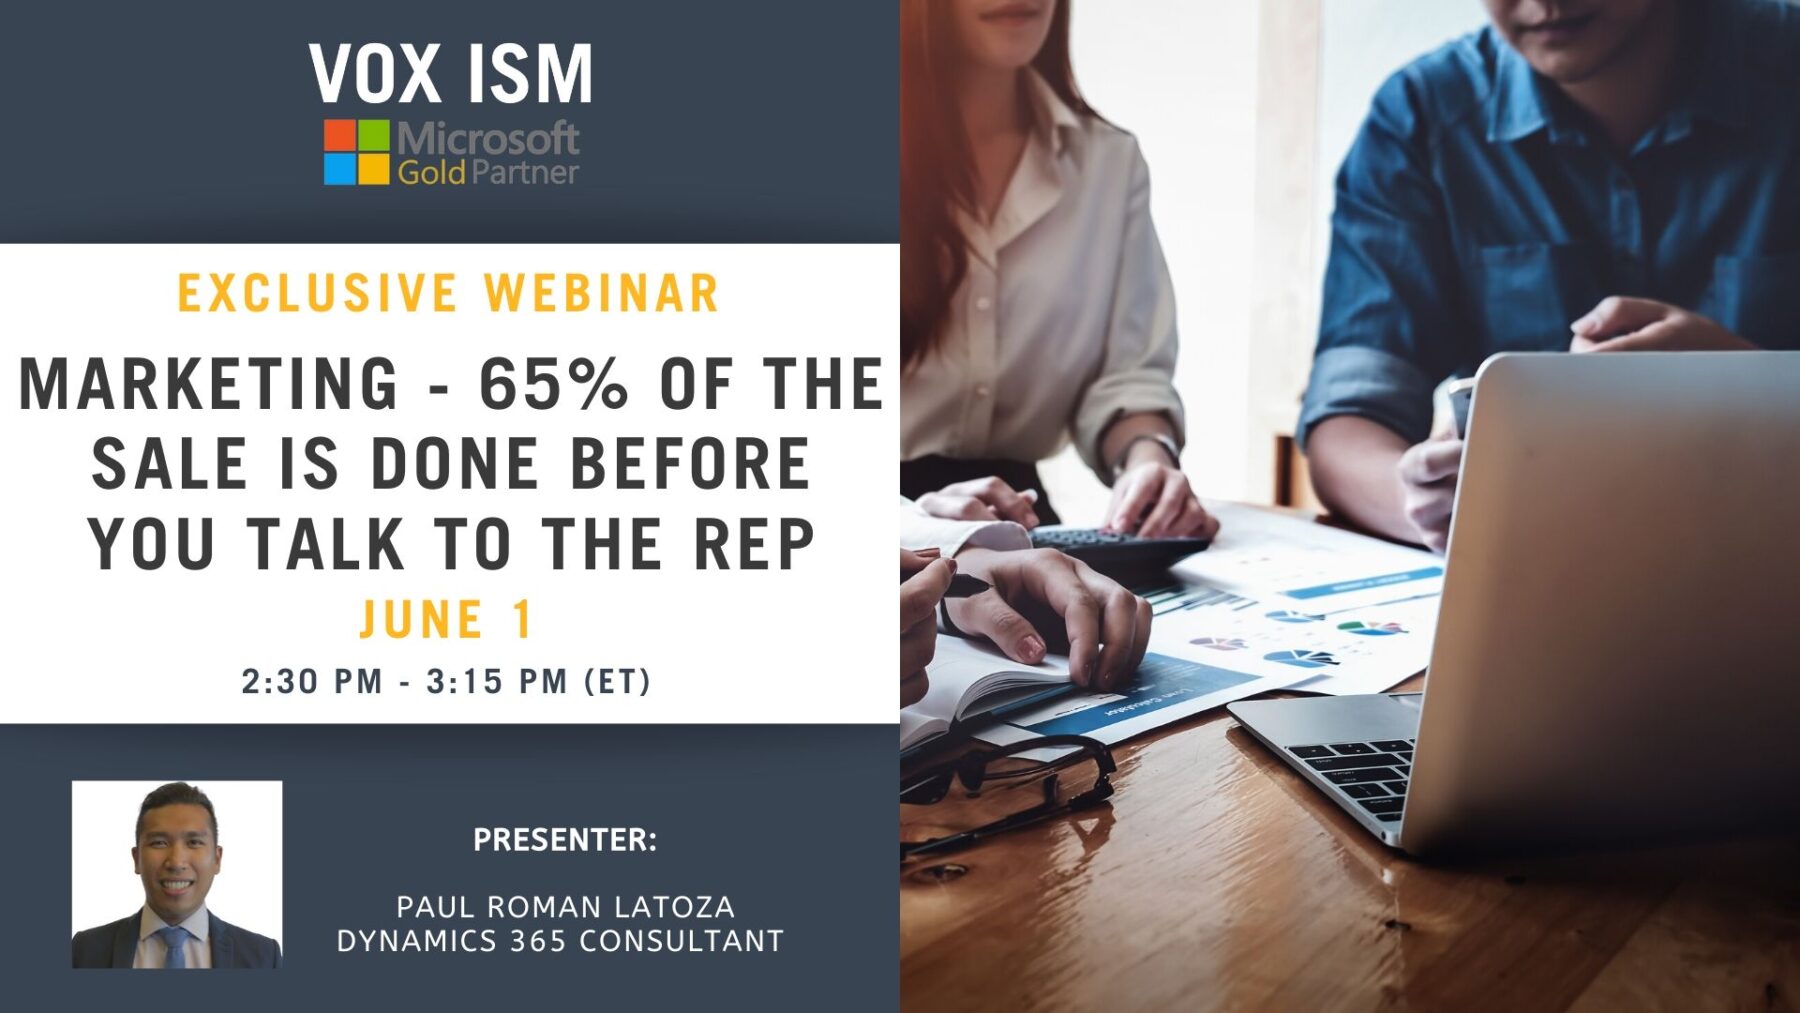 Marketing - 65% of the Sale is done before you talk to the rep - June 1 - Webinar VOX ISM